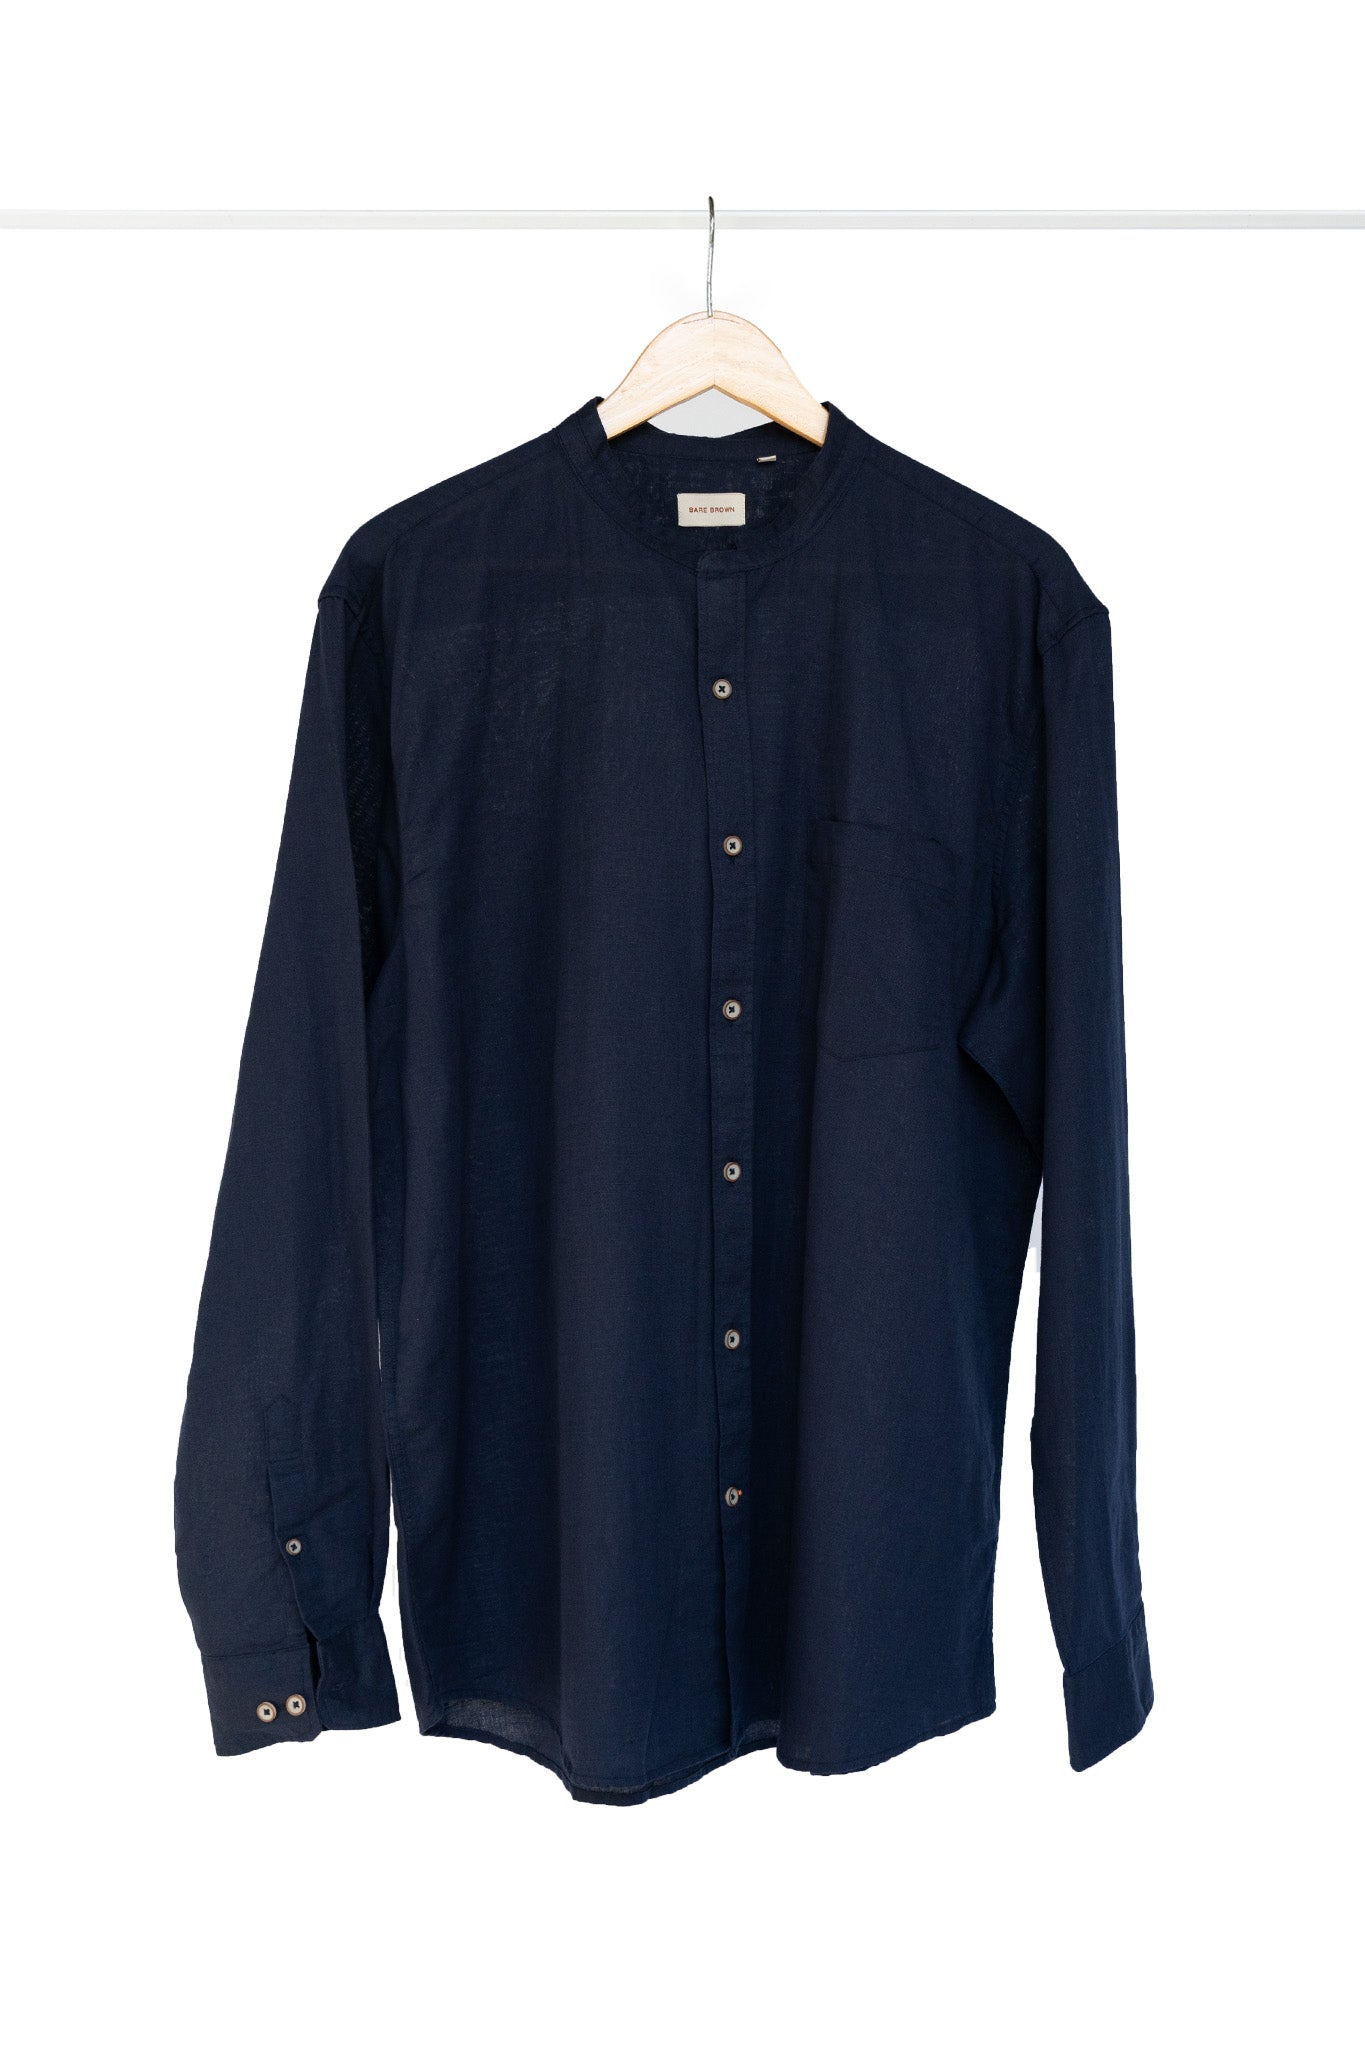 Bare Brown Mandarin Collar Cotton Linen Shirt, Slim Fit with Full Sleeves - Navy Blue